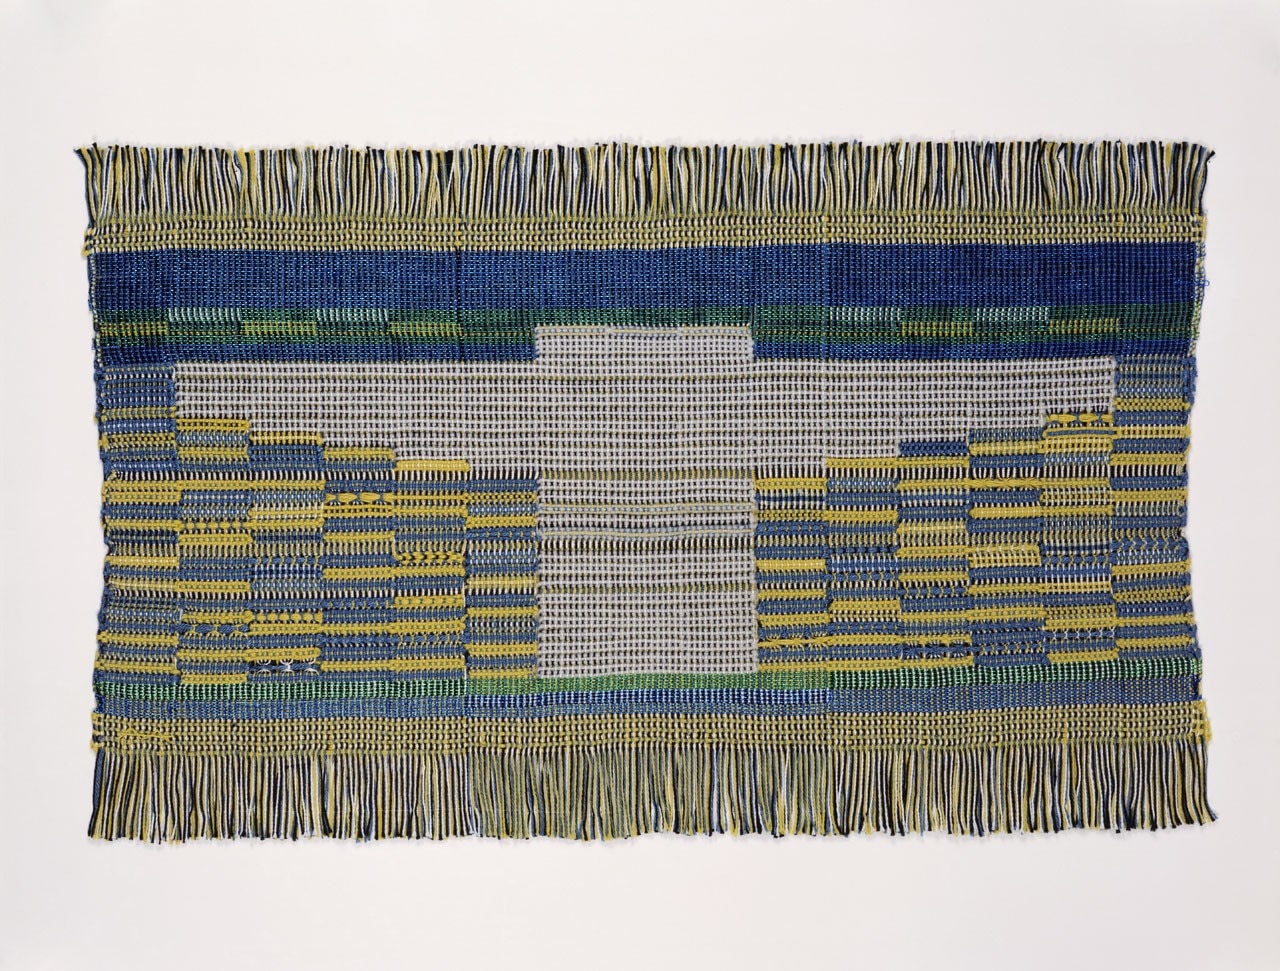 Anni Albers, Sheep May Safely Graze, 1959. Synthetic fiber; woven: plain weave and leno. Collection of Museum of Arts and Design, Gift of Karen Johnson Boyd, through the American Craft Council, 1977. Photo Eva Heyd